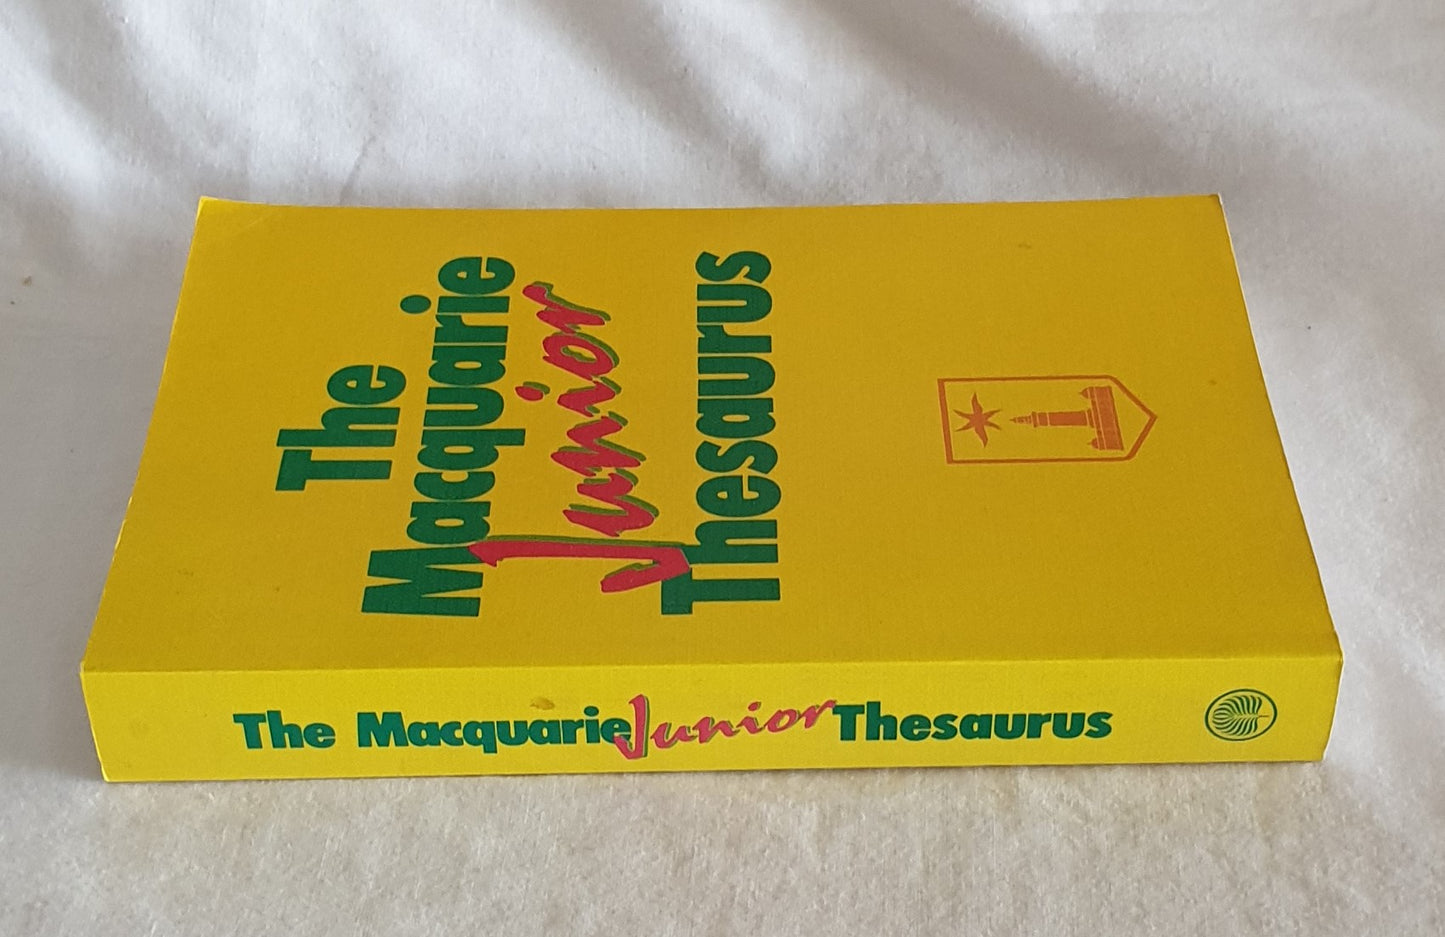 The Macquarie Junior Thesaurus by Linsay Knight